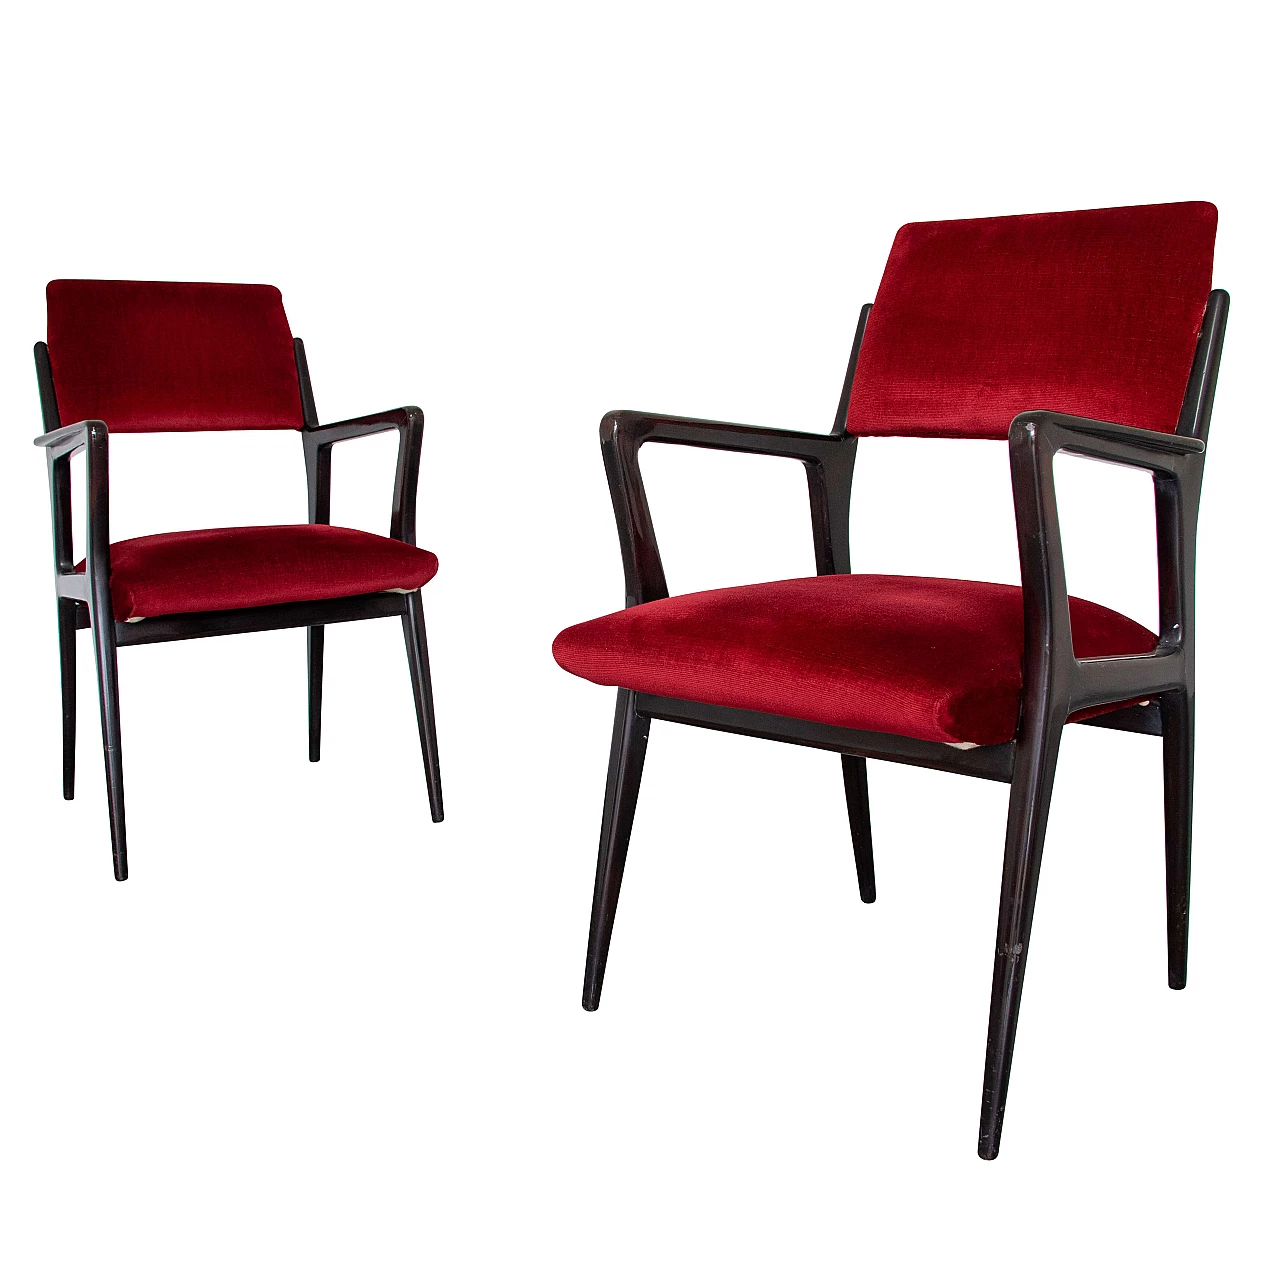 Pair of armchairs in wood and red velvet, 1950s 1224138